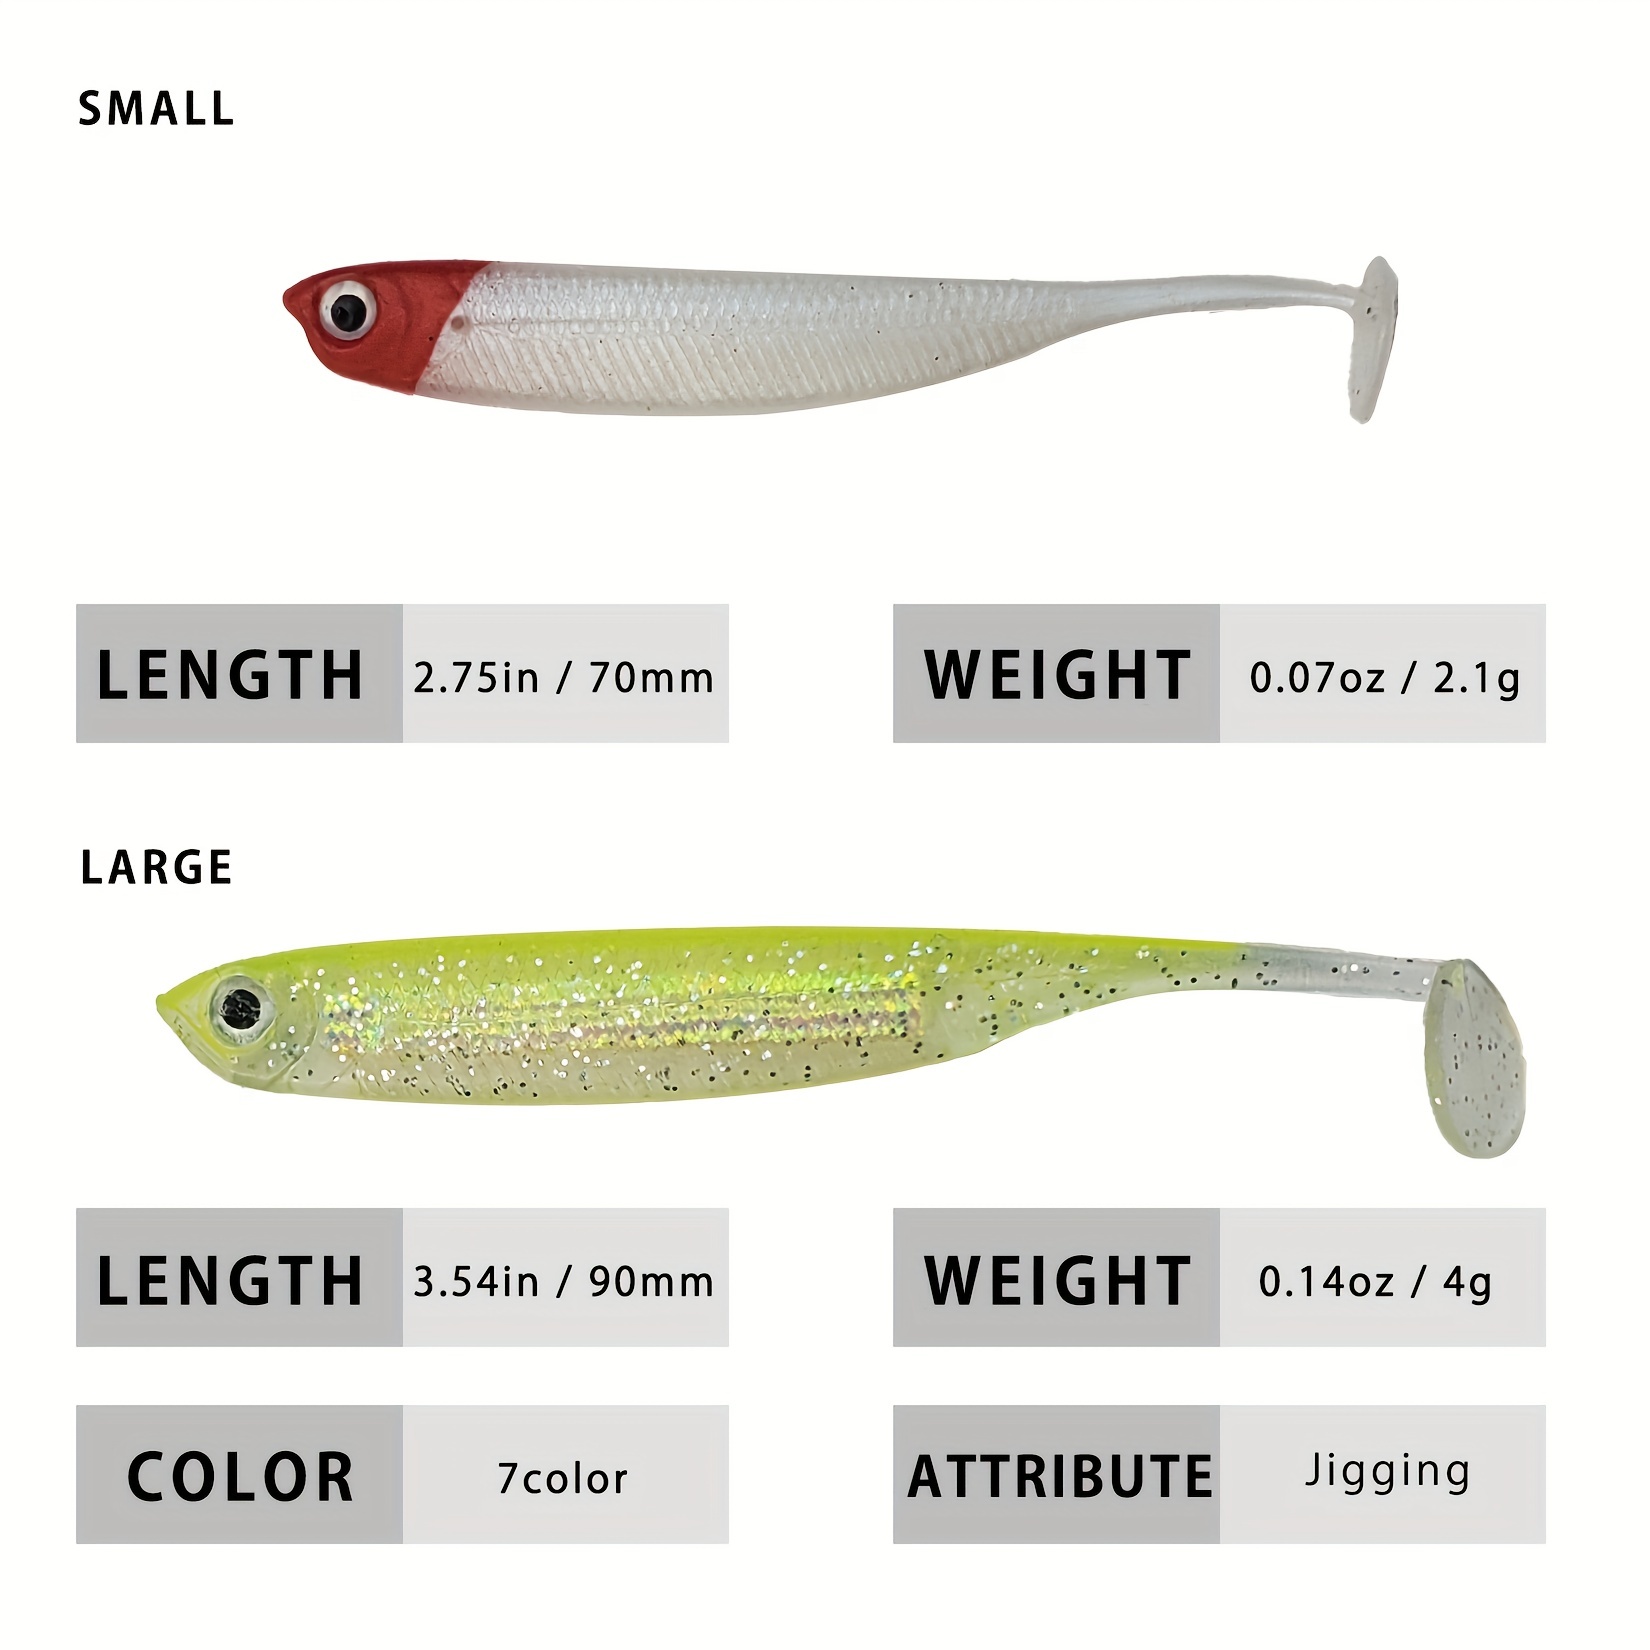 Funzhan Fishing Soft Lures For Bass Artificial Plastic Baits Paddle Tail Swimbaits Creature Shad Proven Colors Natural Oils Portable Box For Crappie